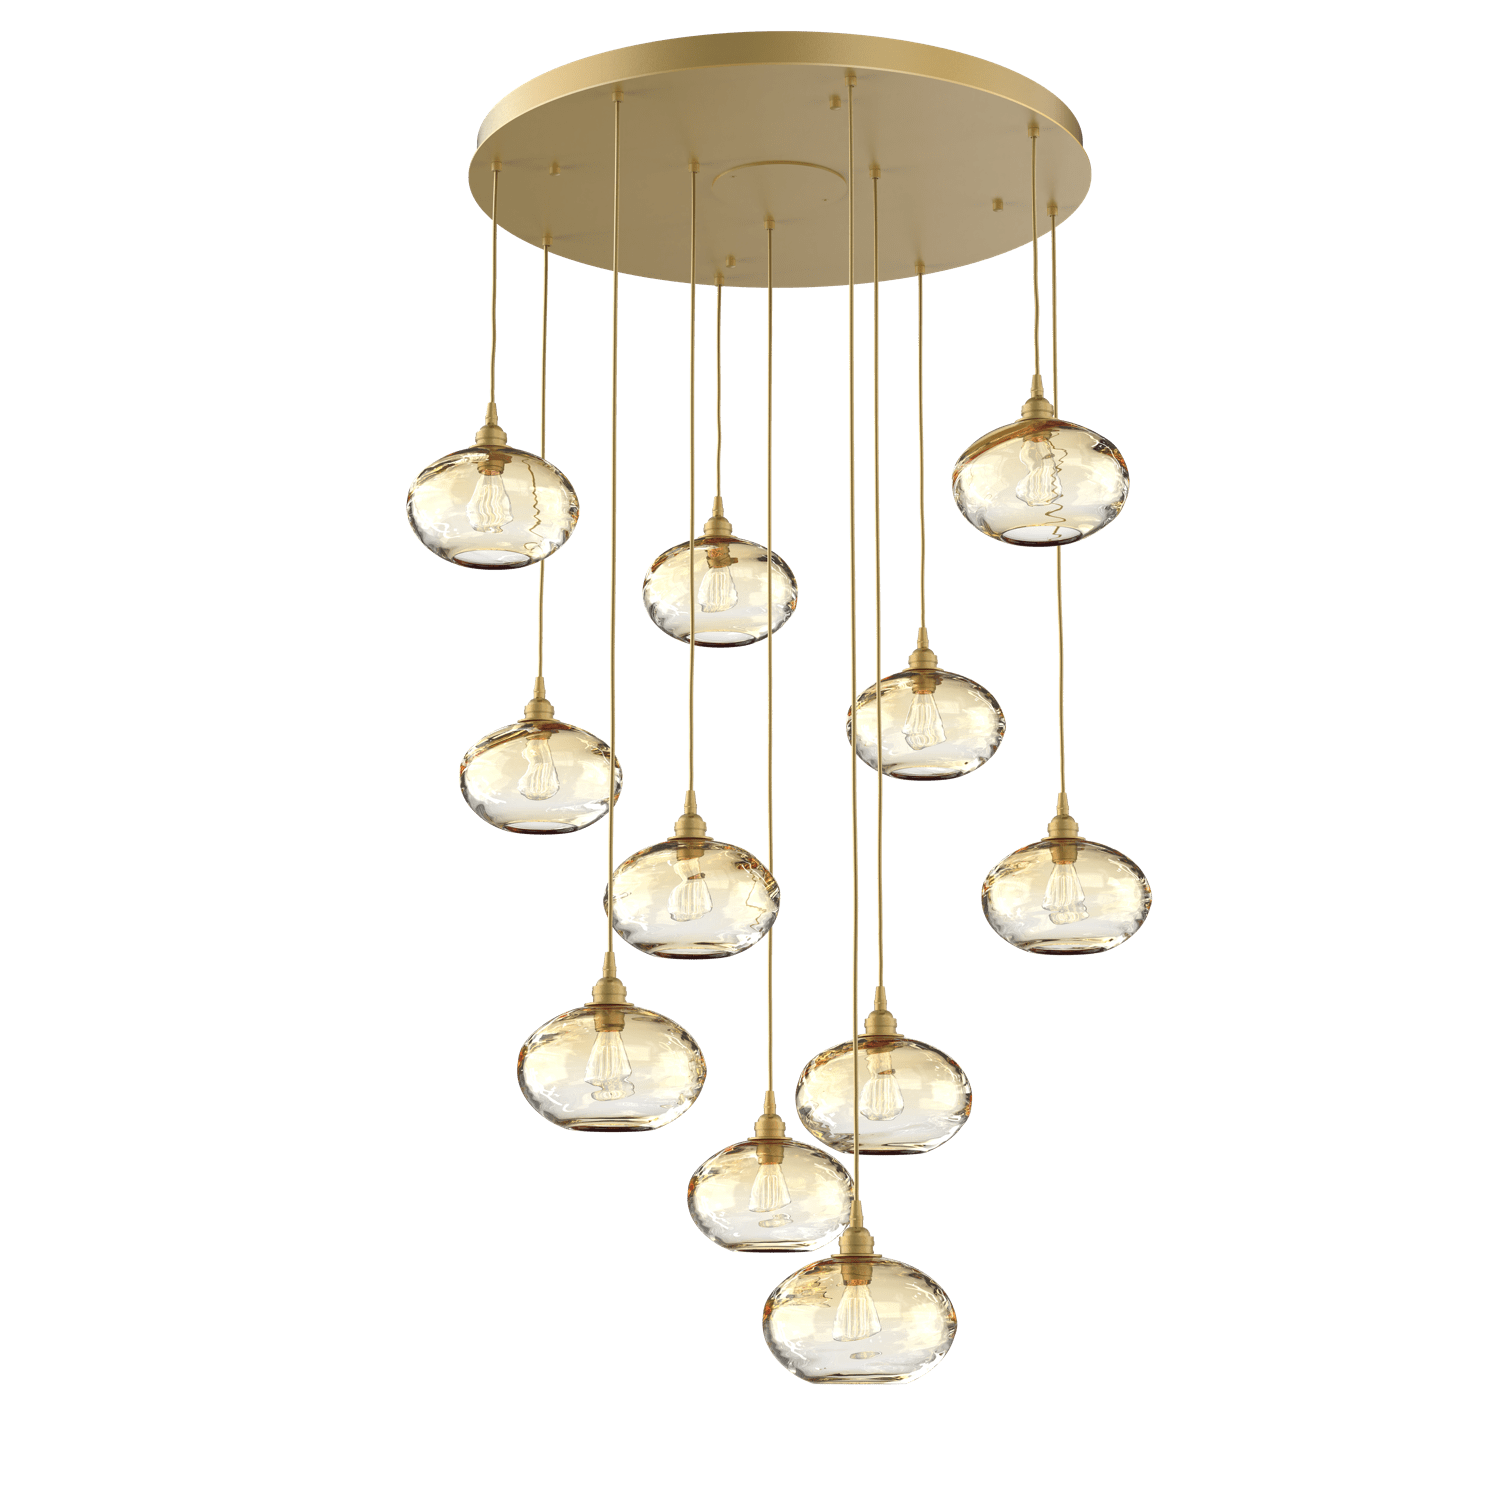 CHB0036-11-GB-OA-Hammerton-Studio-Optic-Blown-Glass-Coppa-11-light-round-pendant-chandelier-with-gilded-brass-finish-and-optic-amber-blown-glass-shades-and-incandescent-lamping